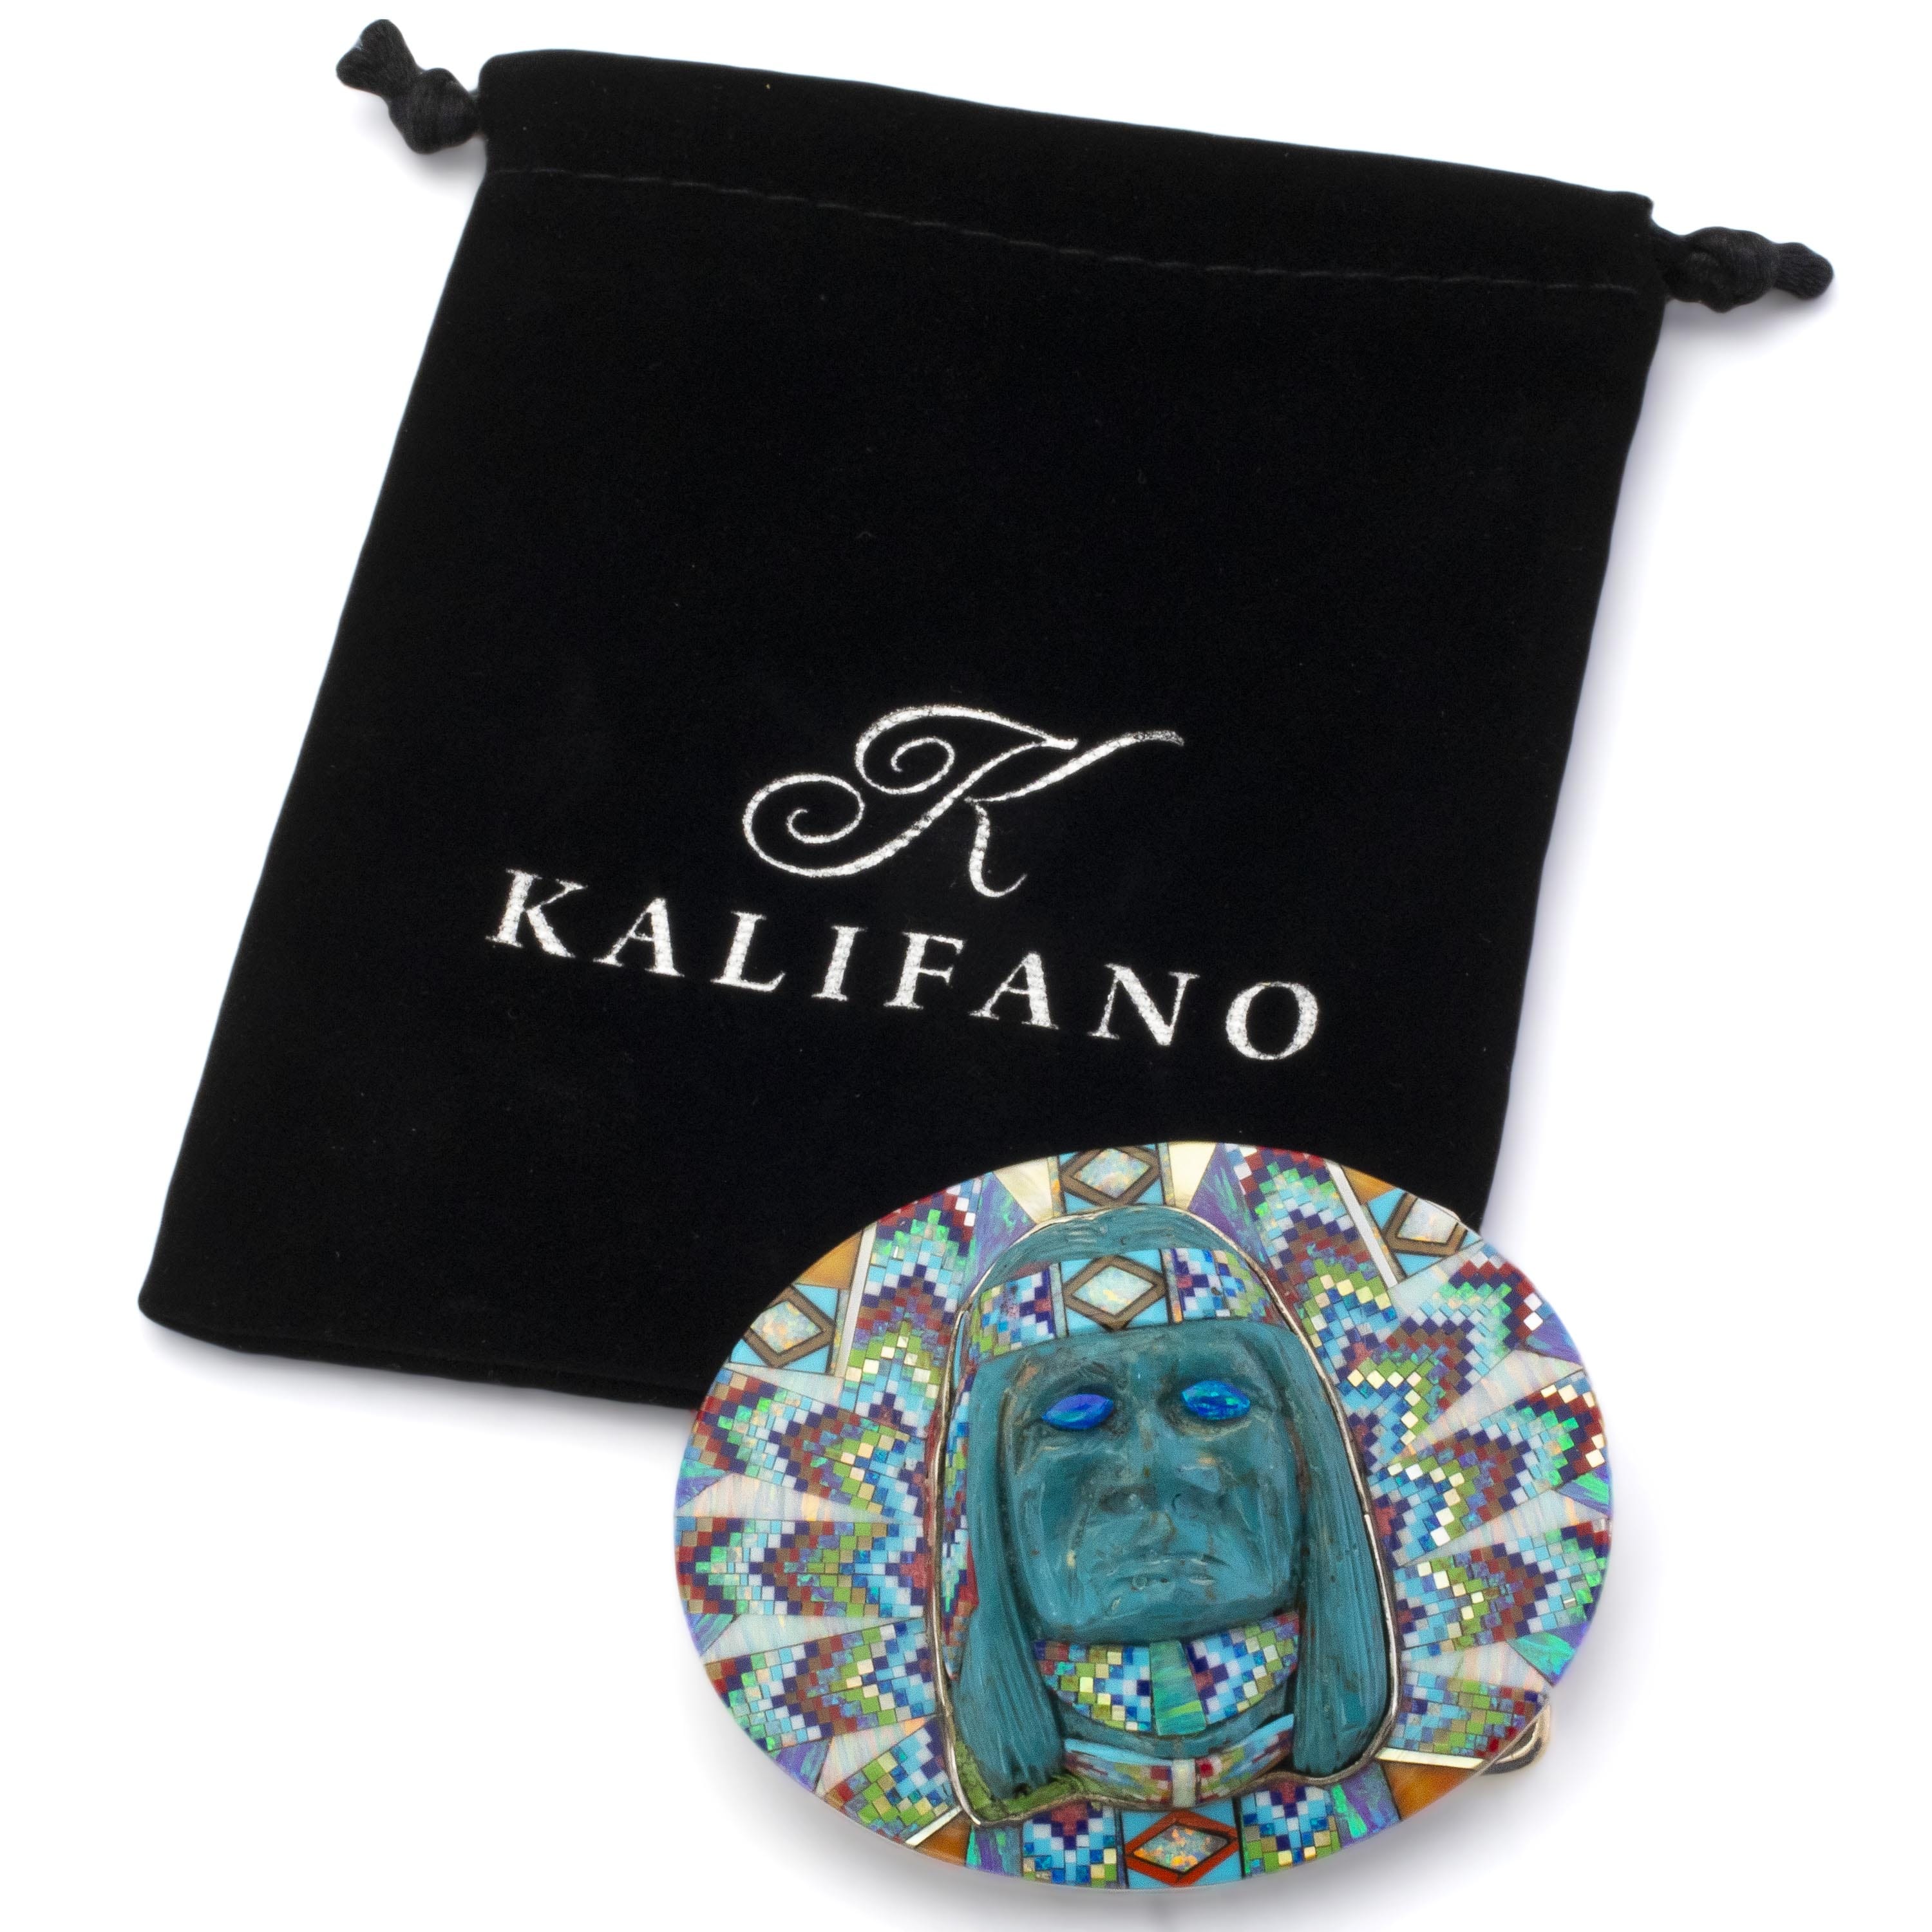 KALIFANO Southwest Silver Jewelry Multi Gem Opal Micro Inlay with Genuine Turquoise Indian Chief Handmade 925 Sterling Silver Oval Belt Buckle AKBB2400.002